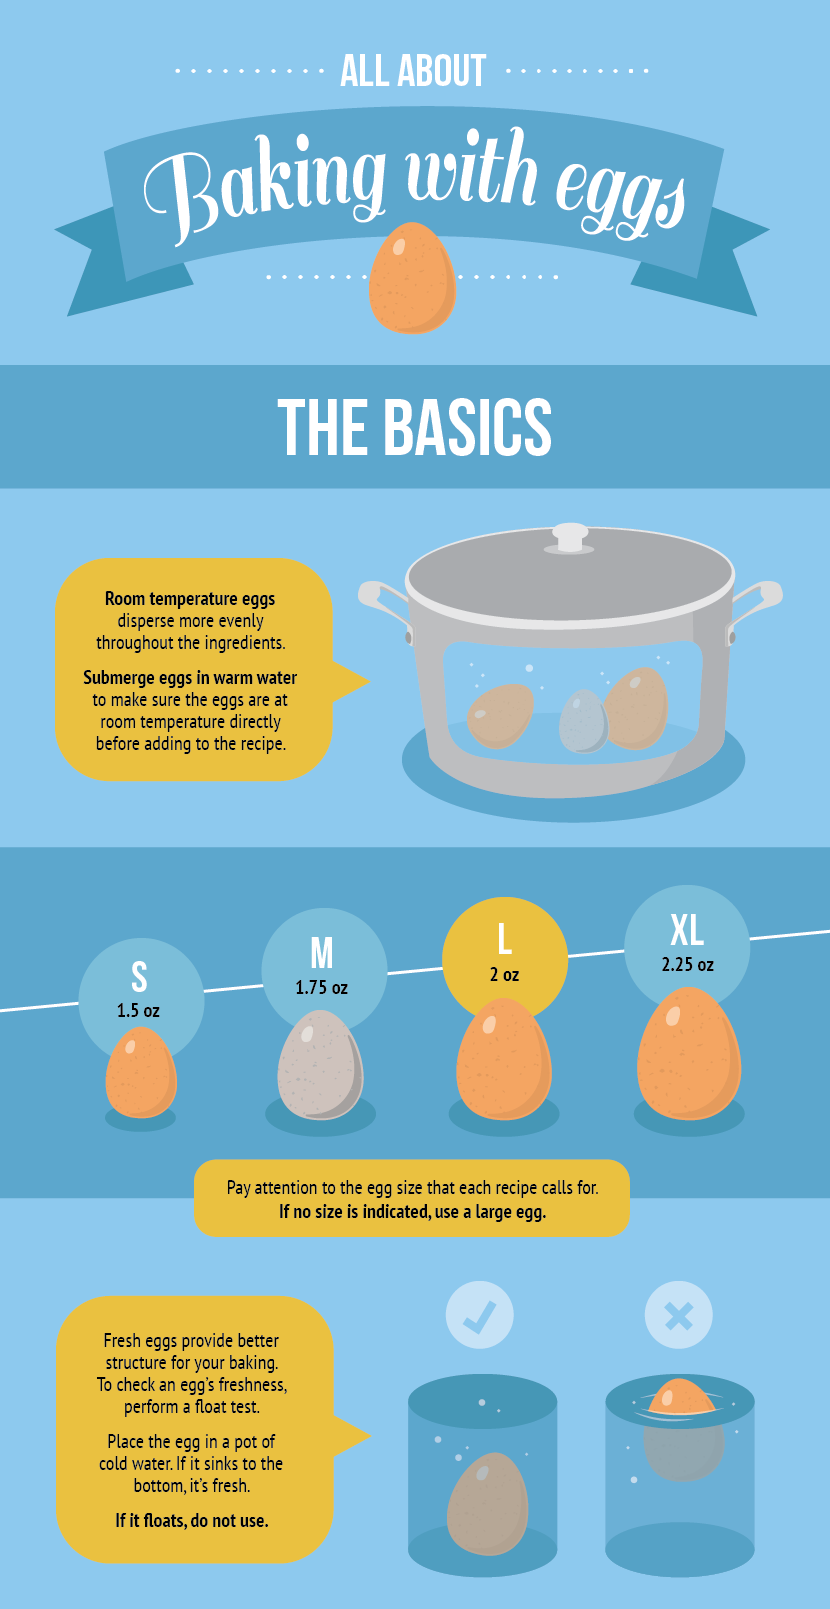 The Basics of Baking With Eggs - All About Baking with Eggs 